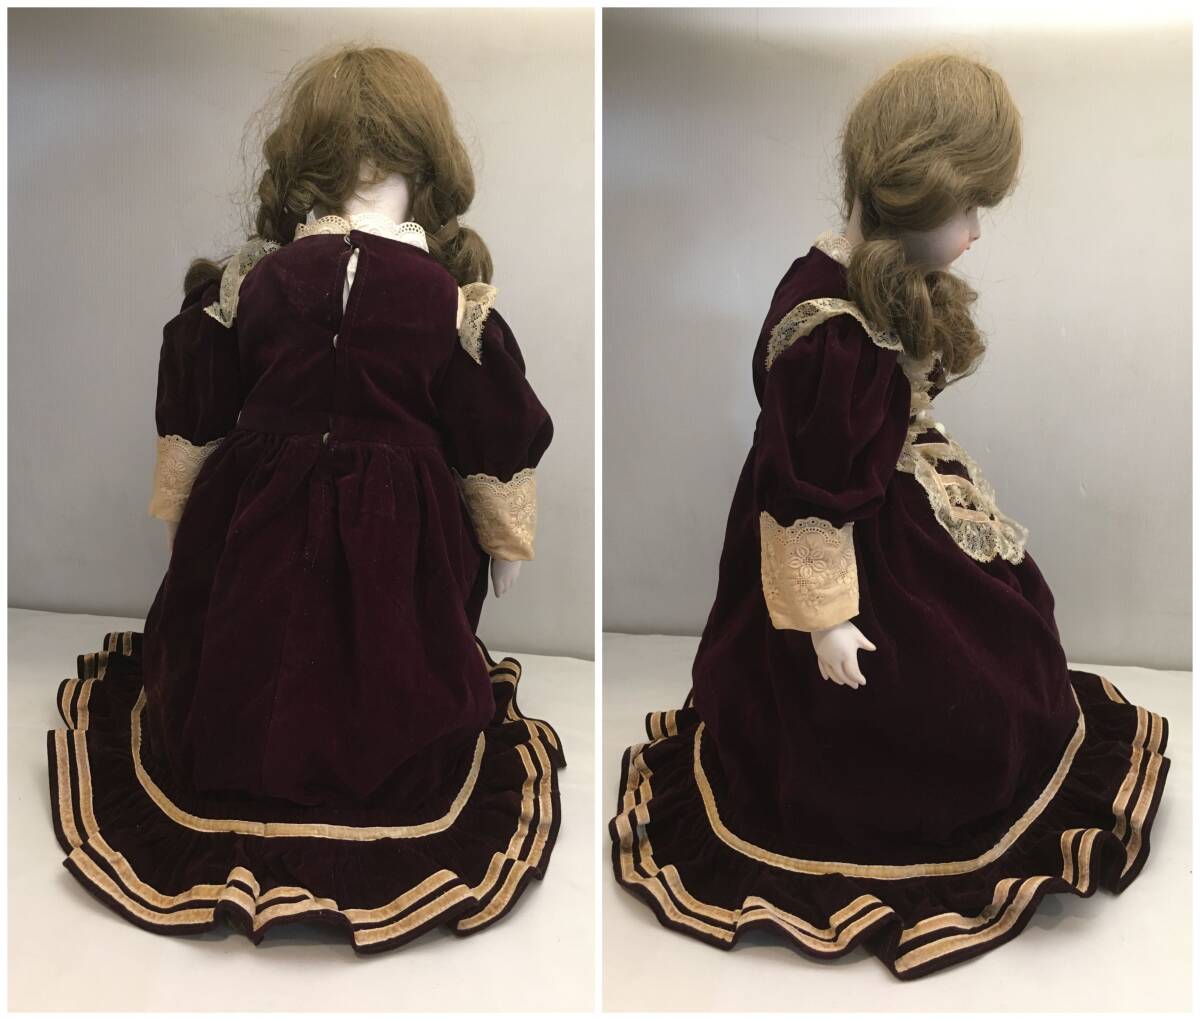 #Collectors Doll collectors doll CD-7 bisque doll height 53.5cm bordeaux. dress ....... long hair West doll #